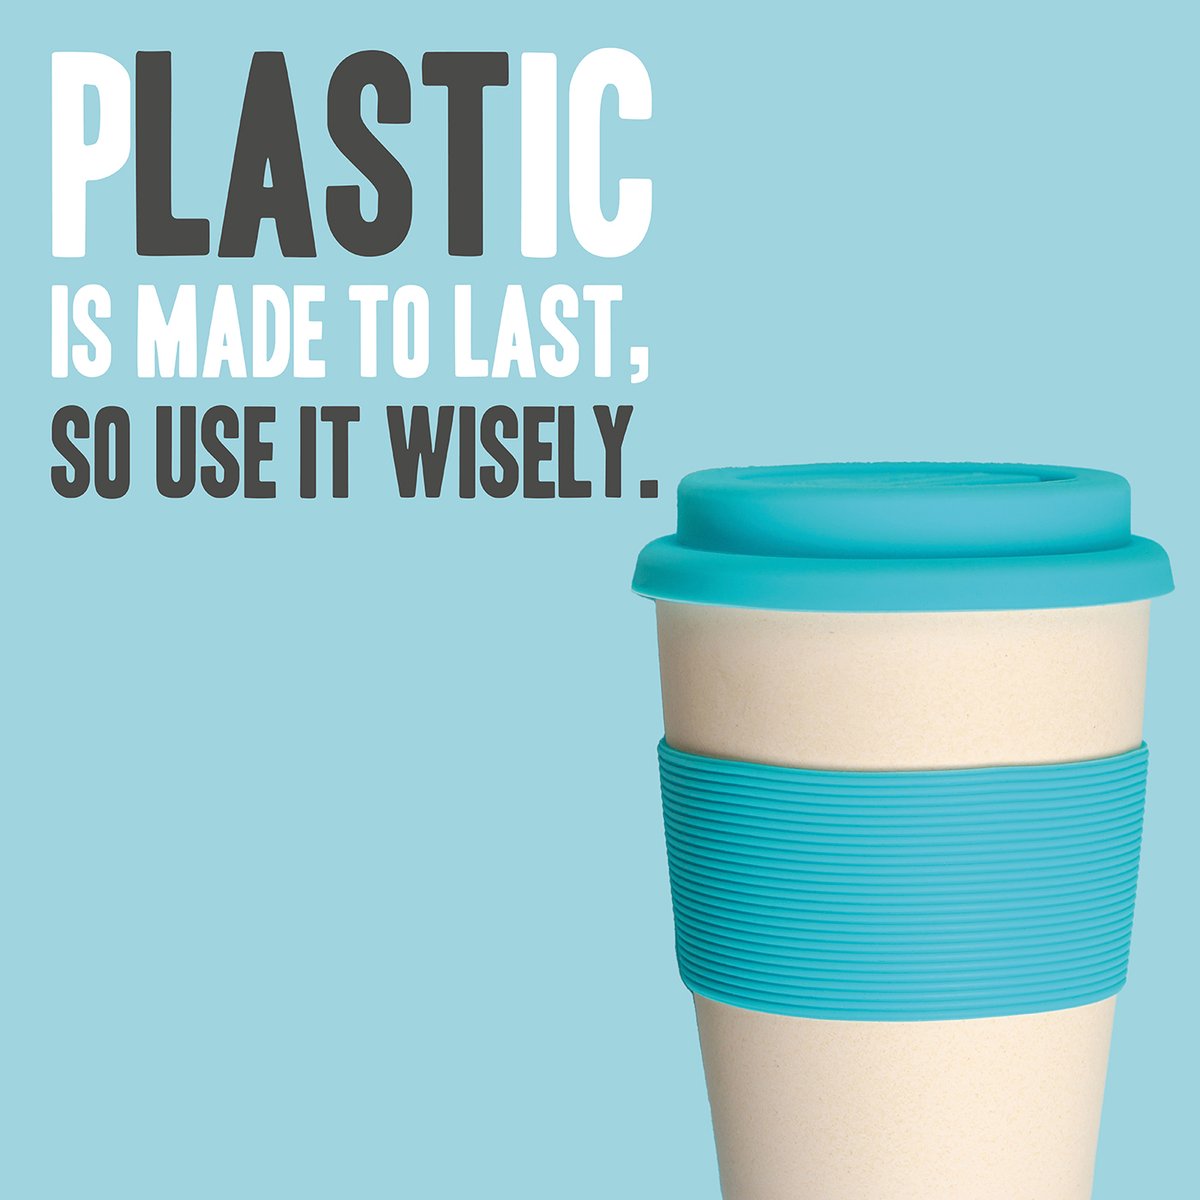 It’s time to throw out our throwaway culture! #PlasticLasts, making it a great material for long-lasting reusable products and bad for single-use stuff that’s used for seconds. #ChooseToReuse instead. #PlanetVsPlastics #EarthDay2024